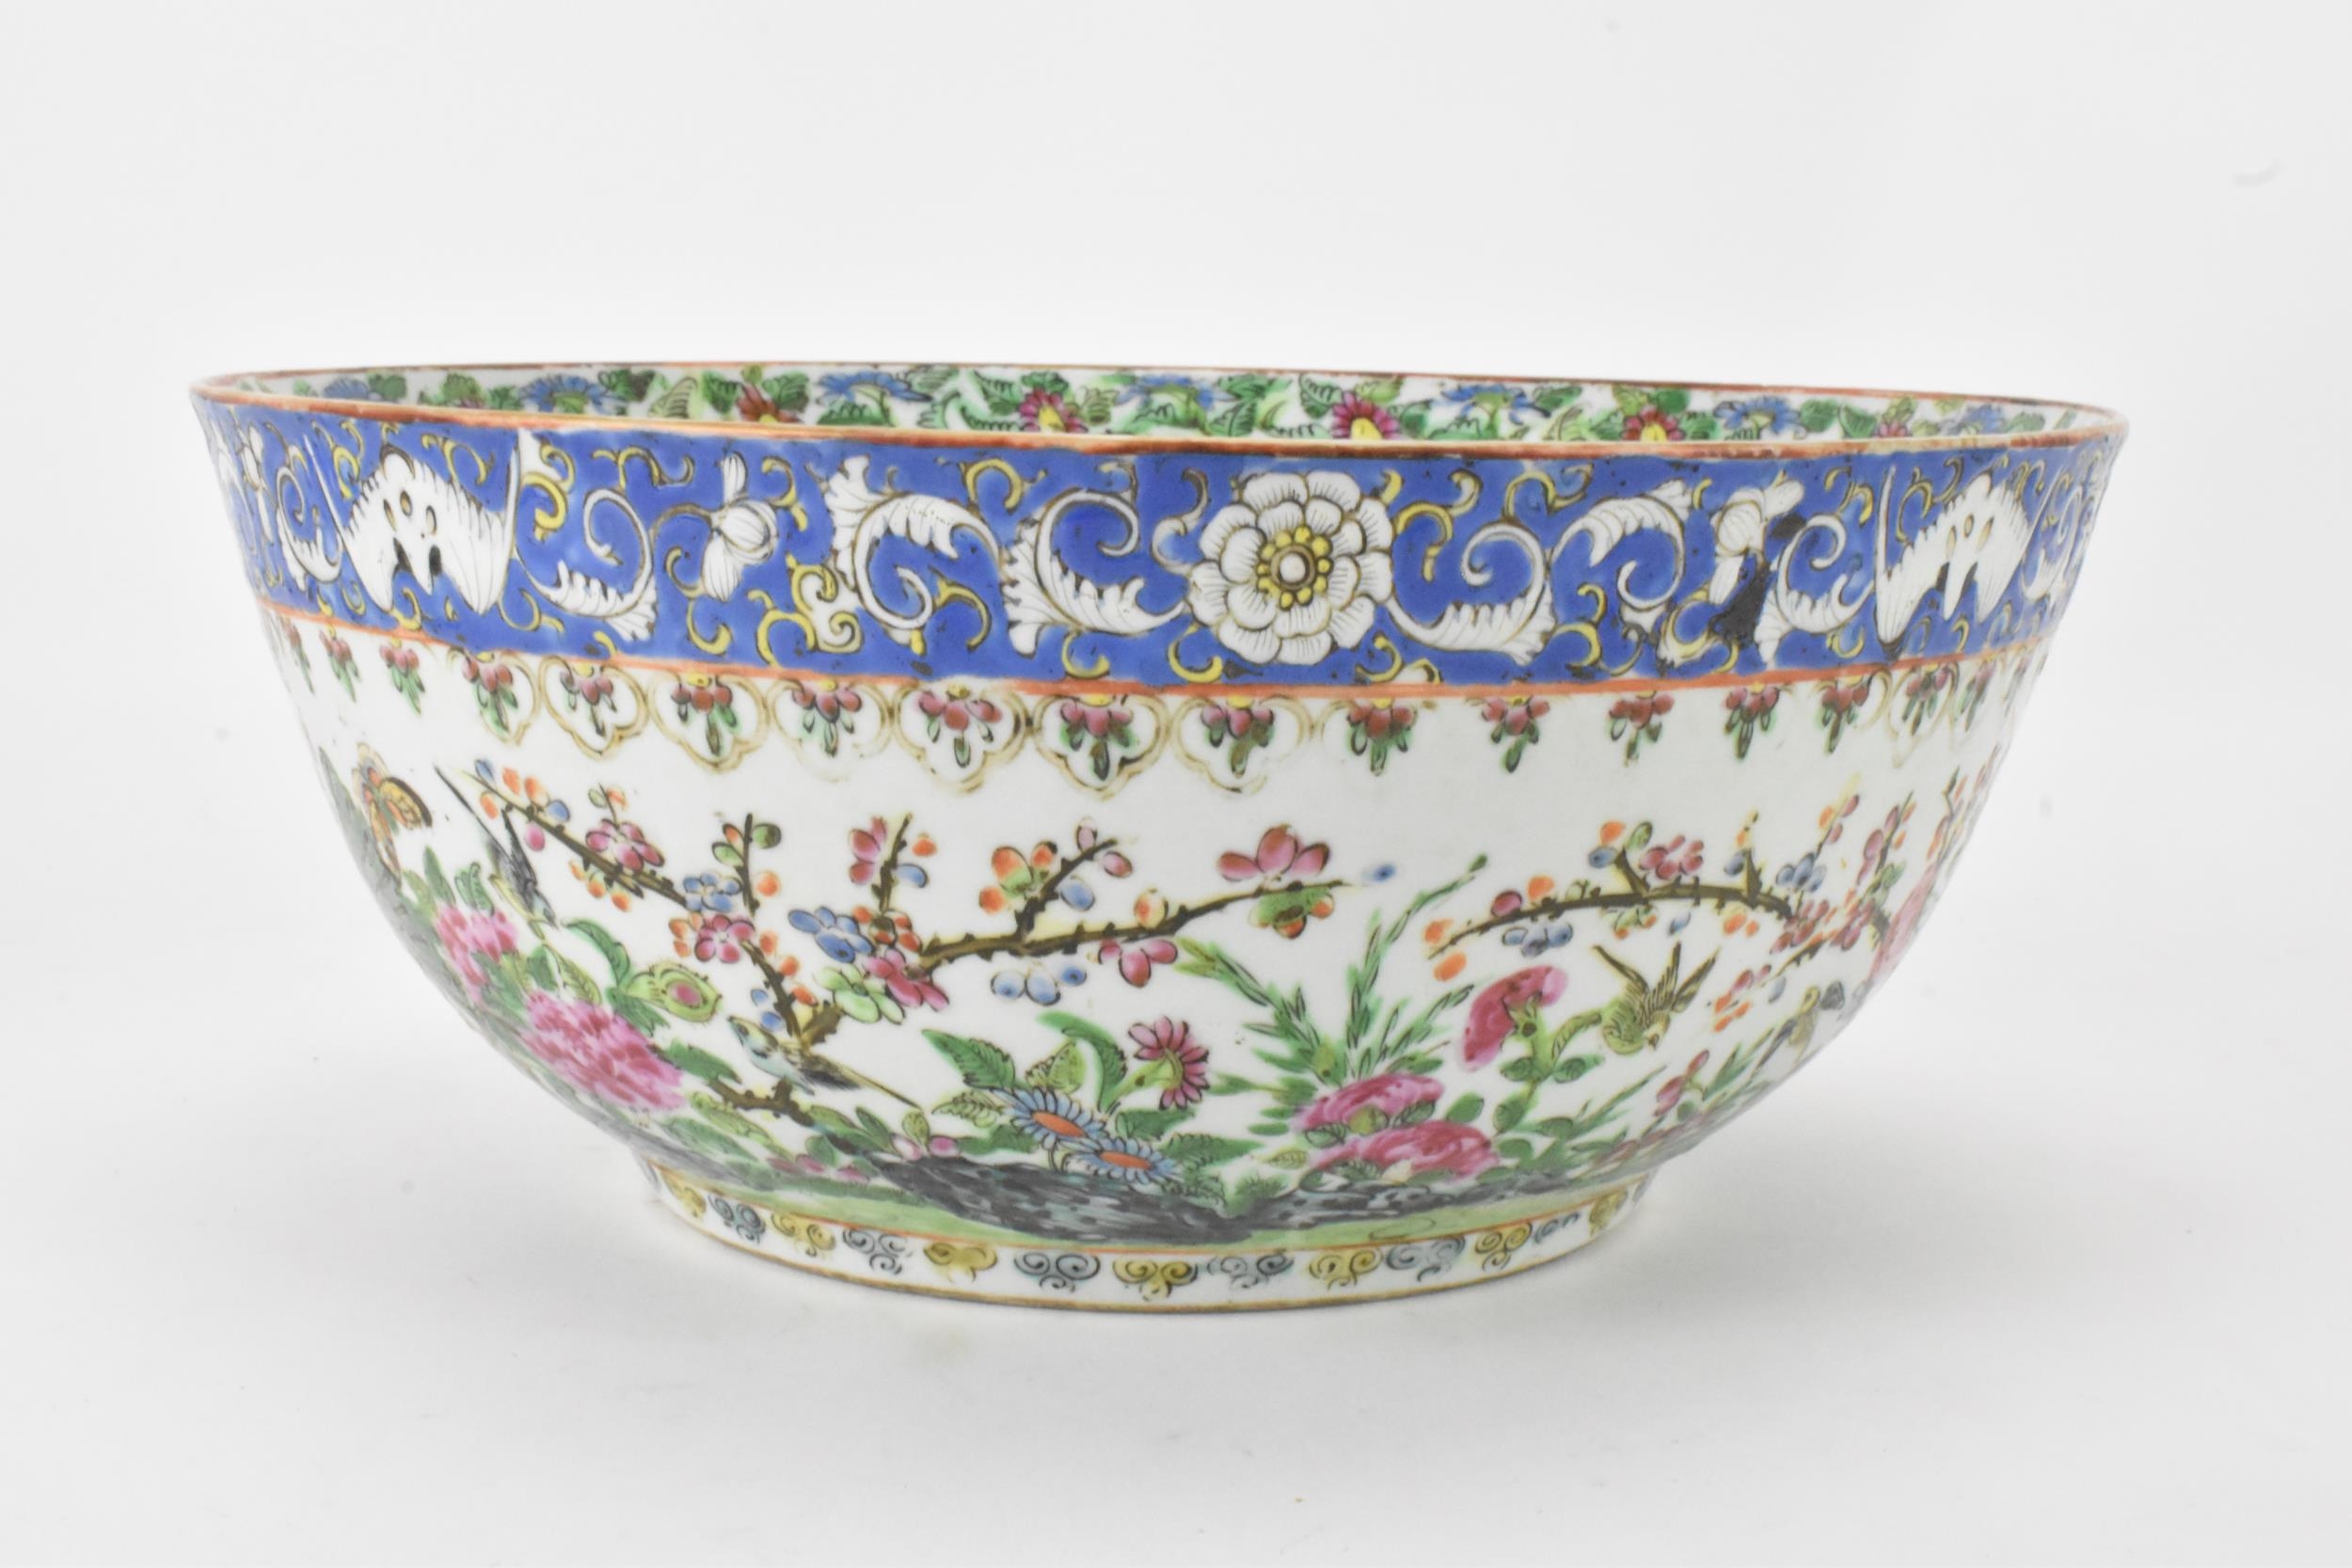 A near pair of Chinese export Canton famille rose punch bowls, Qing dynasty, late 19th century, - Image 12 of 15